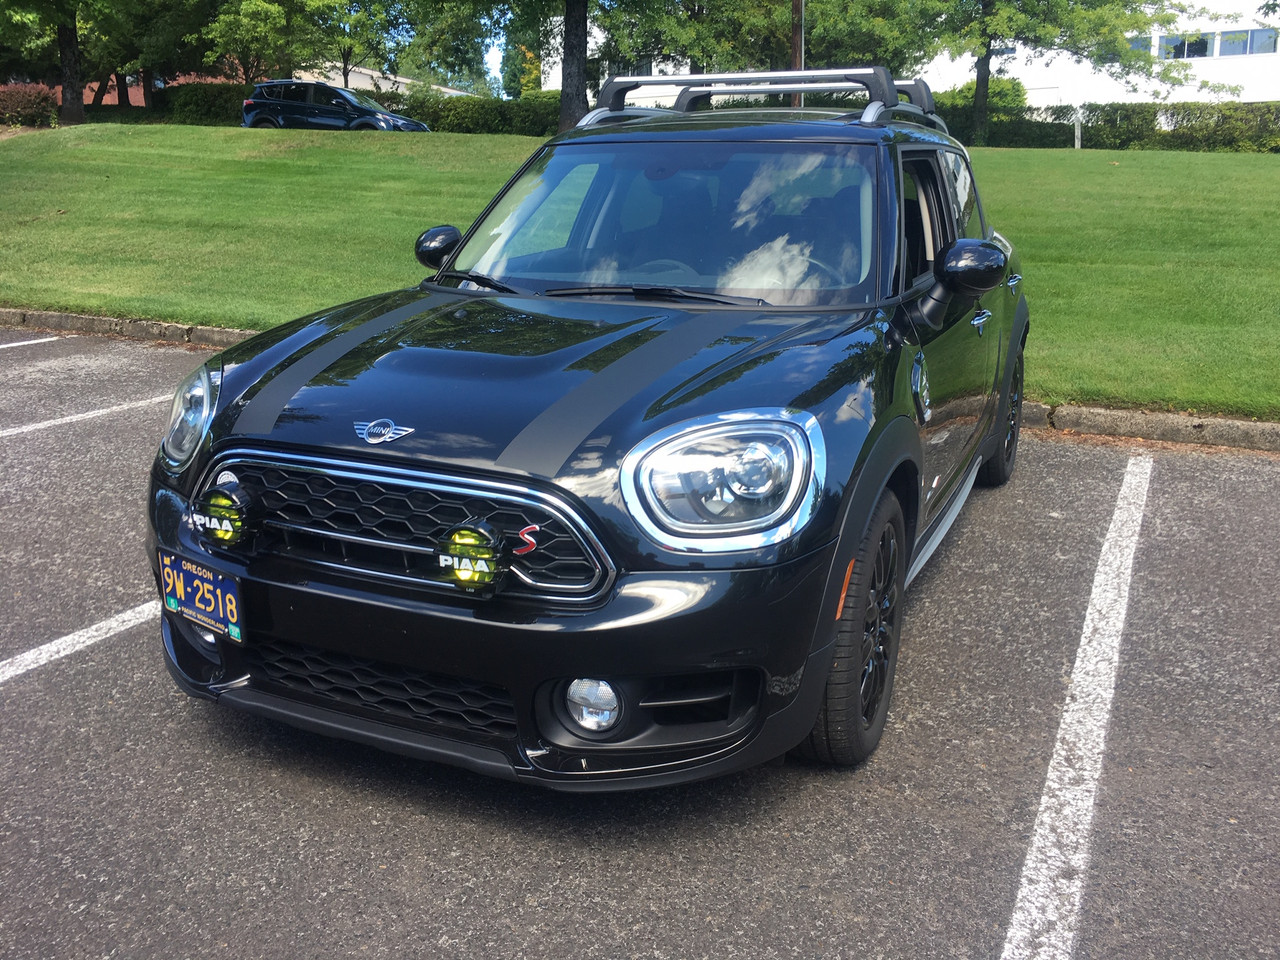 https://cdn11.bigcommerce.com/s-351ed/images/stencil/{:size}/products/20715/184587/blackout_beltline_trim_decal_kit_for_mini_countryman_r60_2011_to_2016_gloss_black_K7ILVM7_20715__22336.1701314270.png?c=2